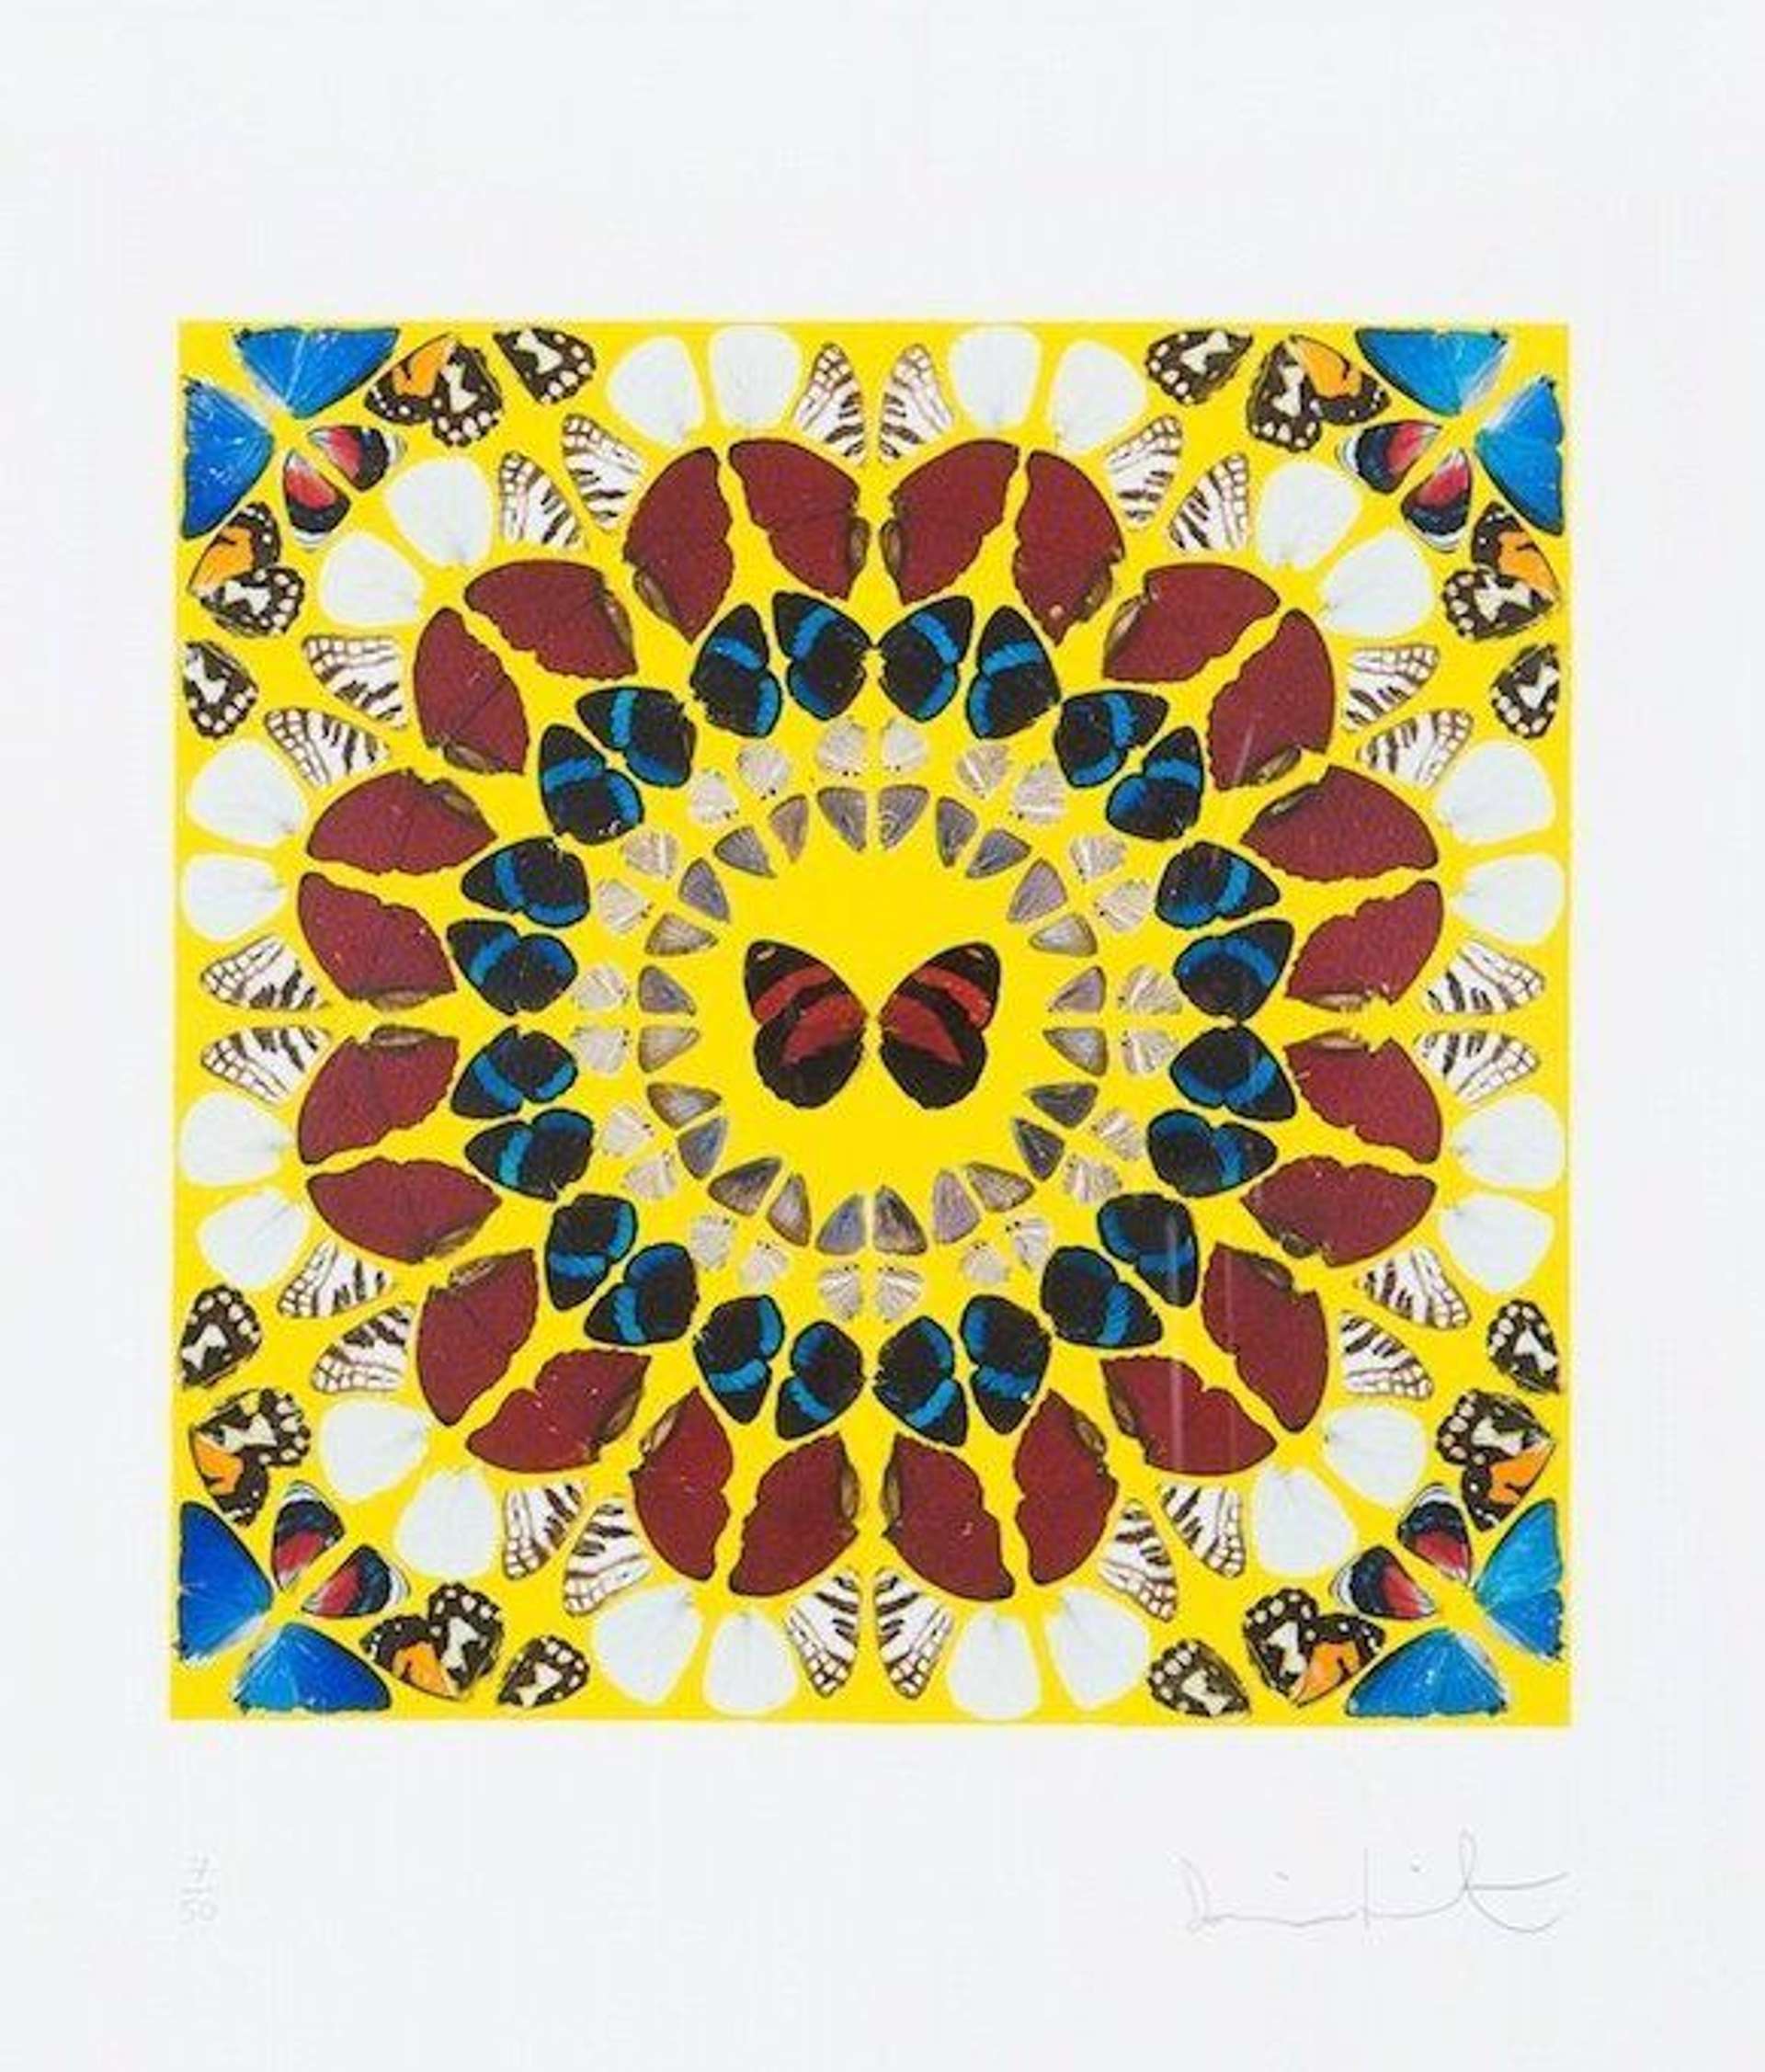 Damien Hirst: Miracle - Signed Print